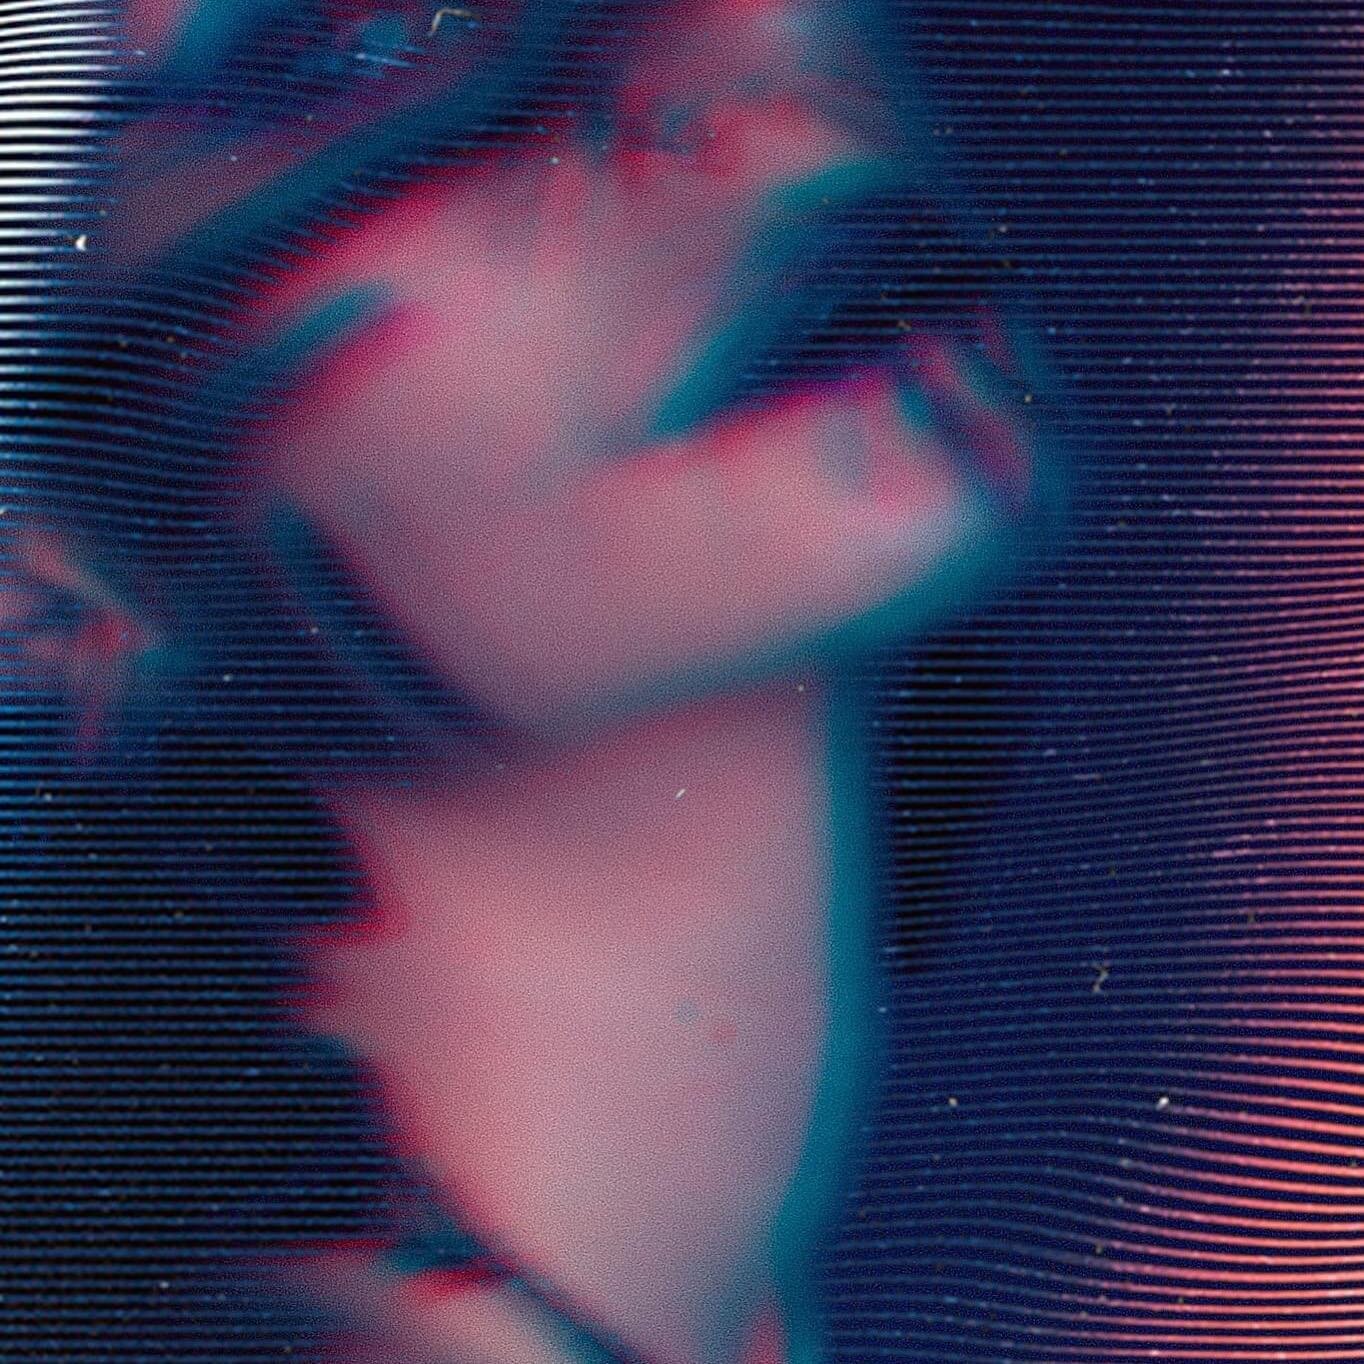 I am not your kind/hiding in plain sight
it feels...empty

come undone with me/death is all we have
come undone again/death is all we have...
.
.
.
.
.
.
.
.
.
.
.
.
.
.
#sadwave #cursedwave #cursed #drowning #liveslowdiewhenever #TooLate #AbyssalVib